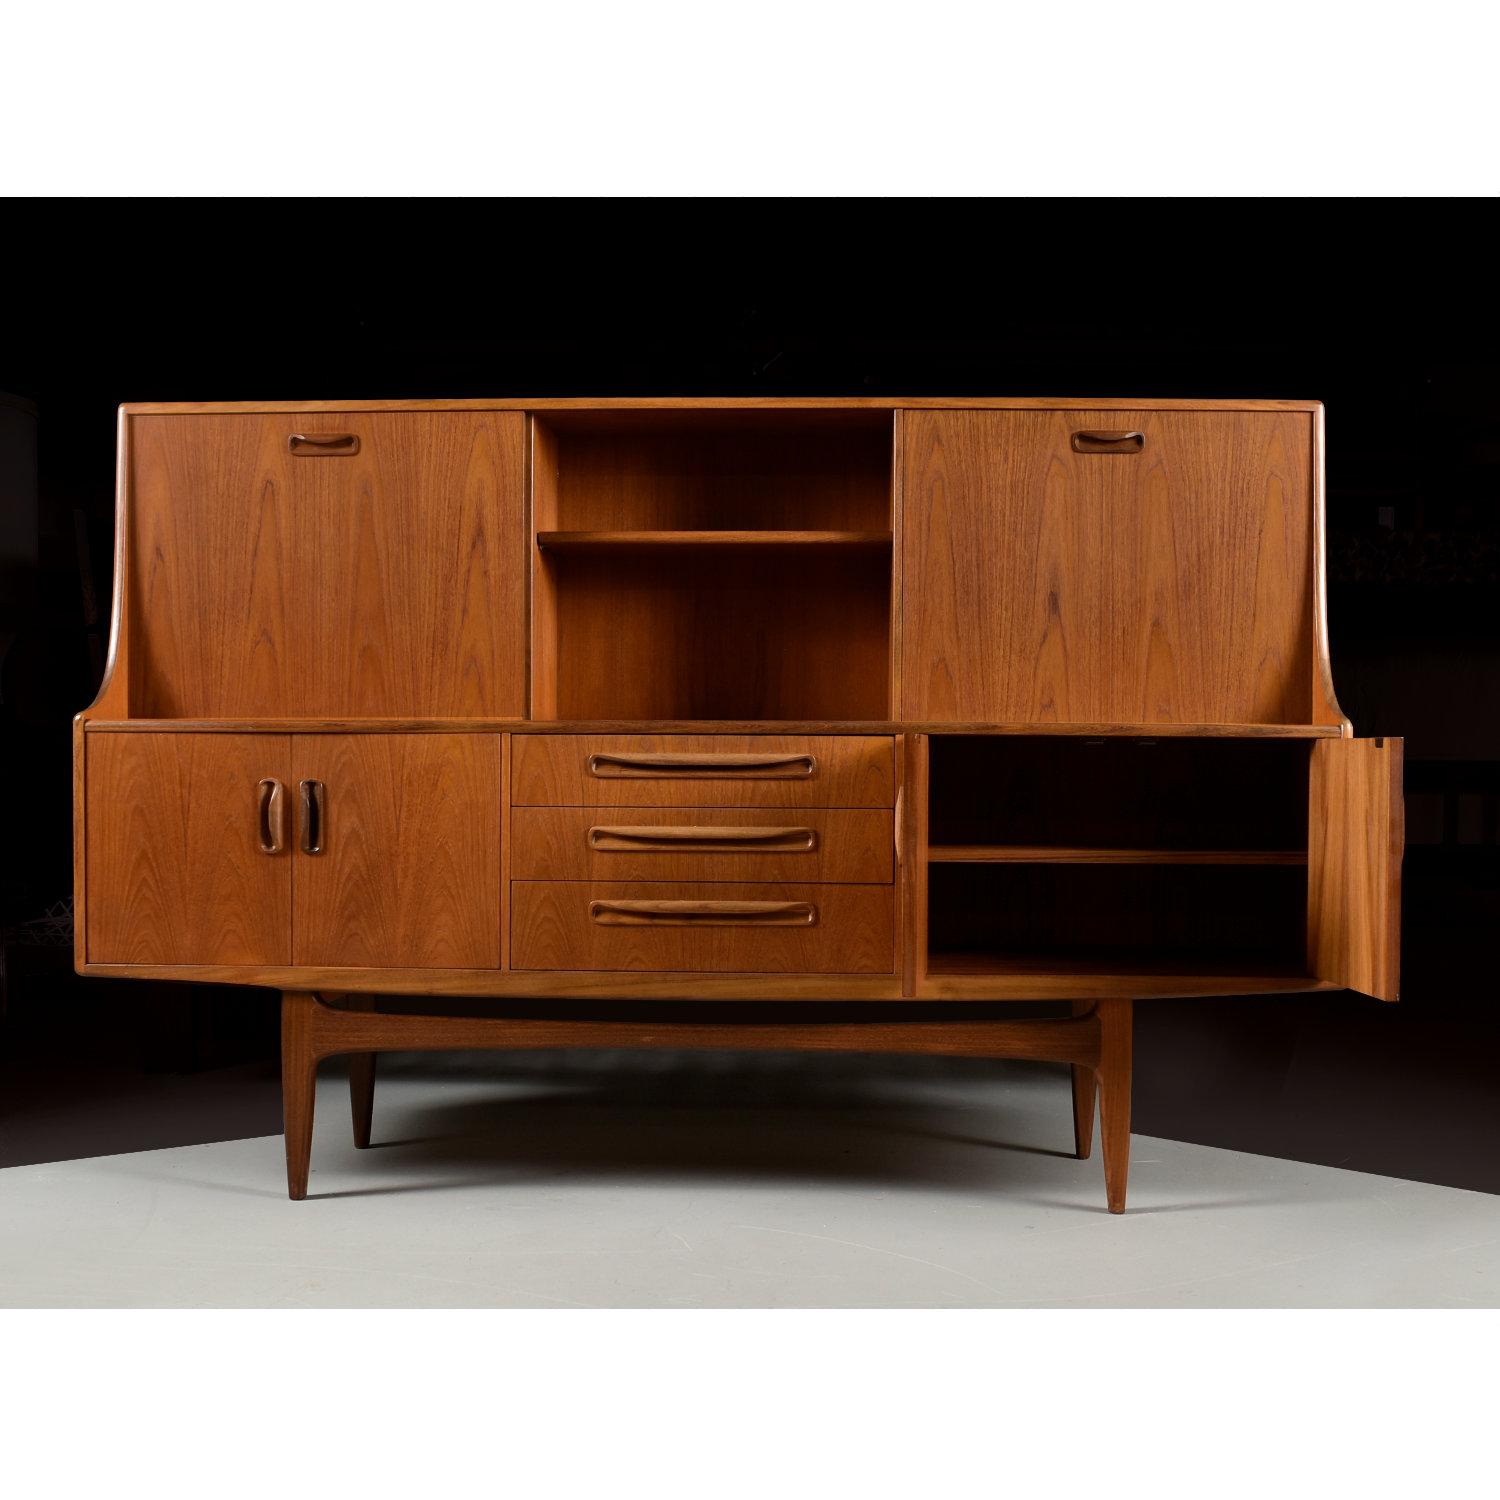 Stunning Mid-Century Modern teak hutch by UK producer, G-Plan. The Danish Modern style sideboard looks Scandinavian but was actually made in the United Kingdom. The cabinet still bear’s the maker’s mark on the backside of one of the doors. This